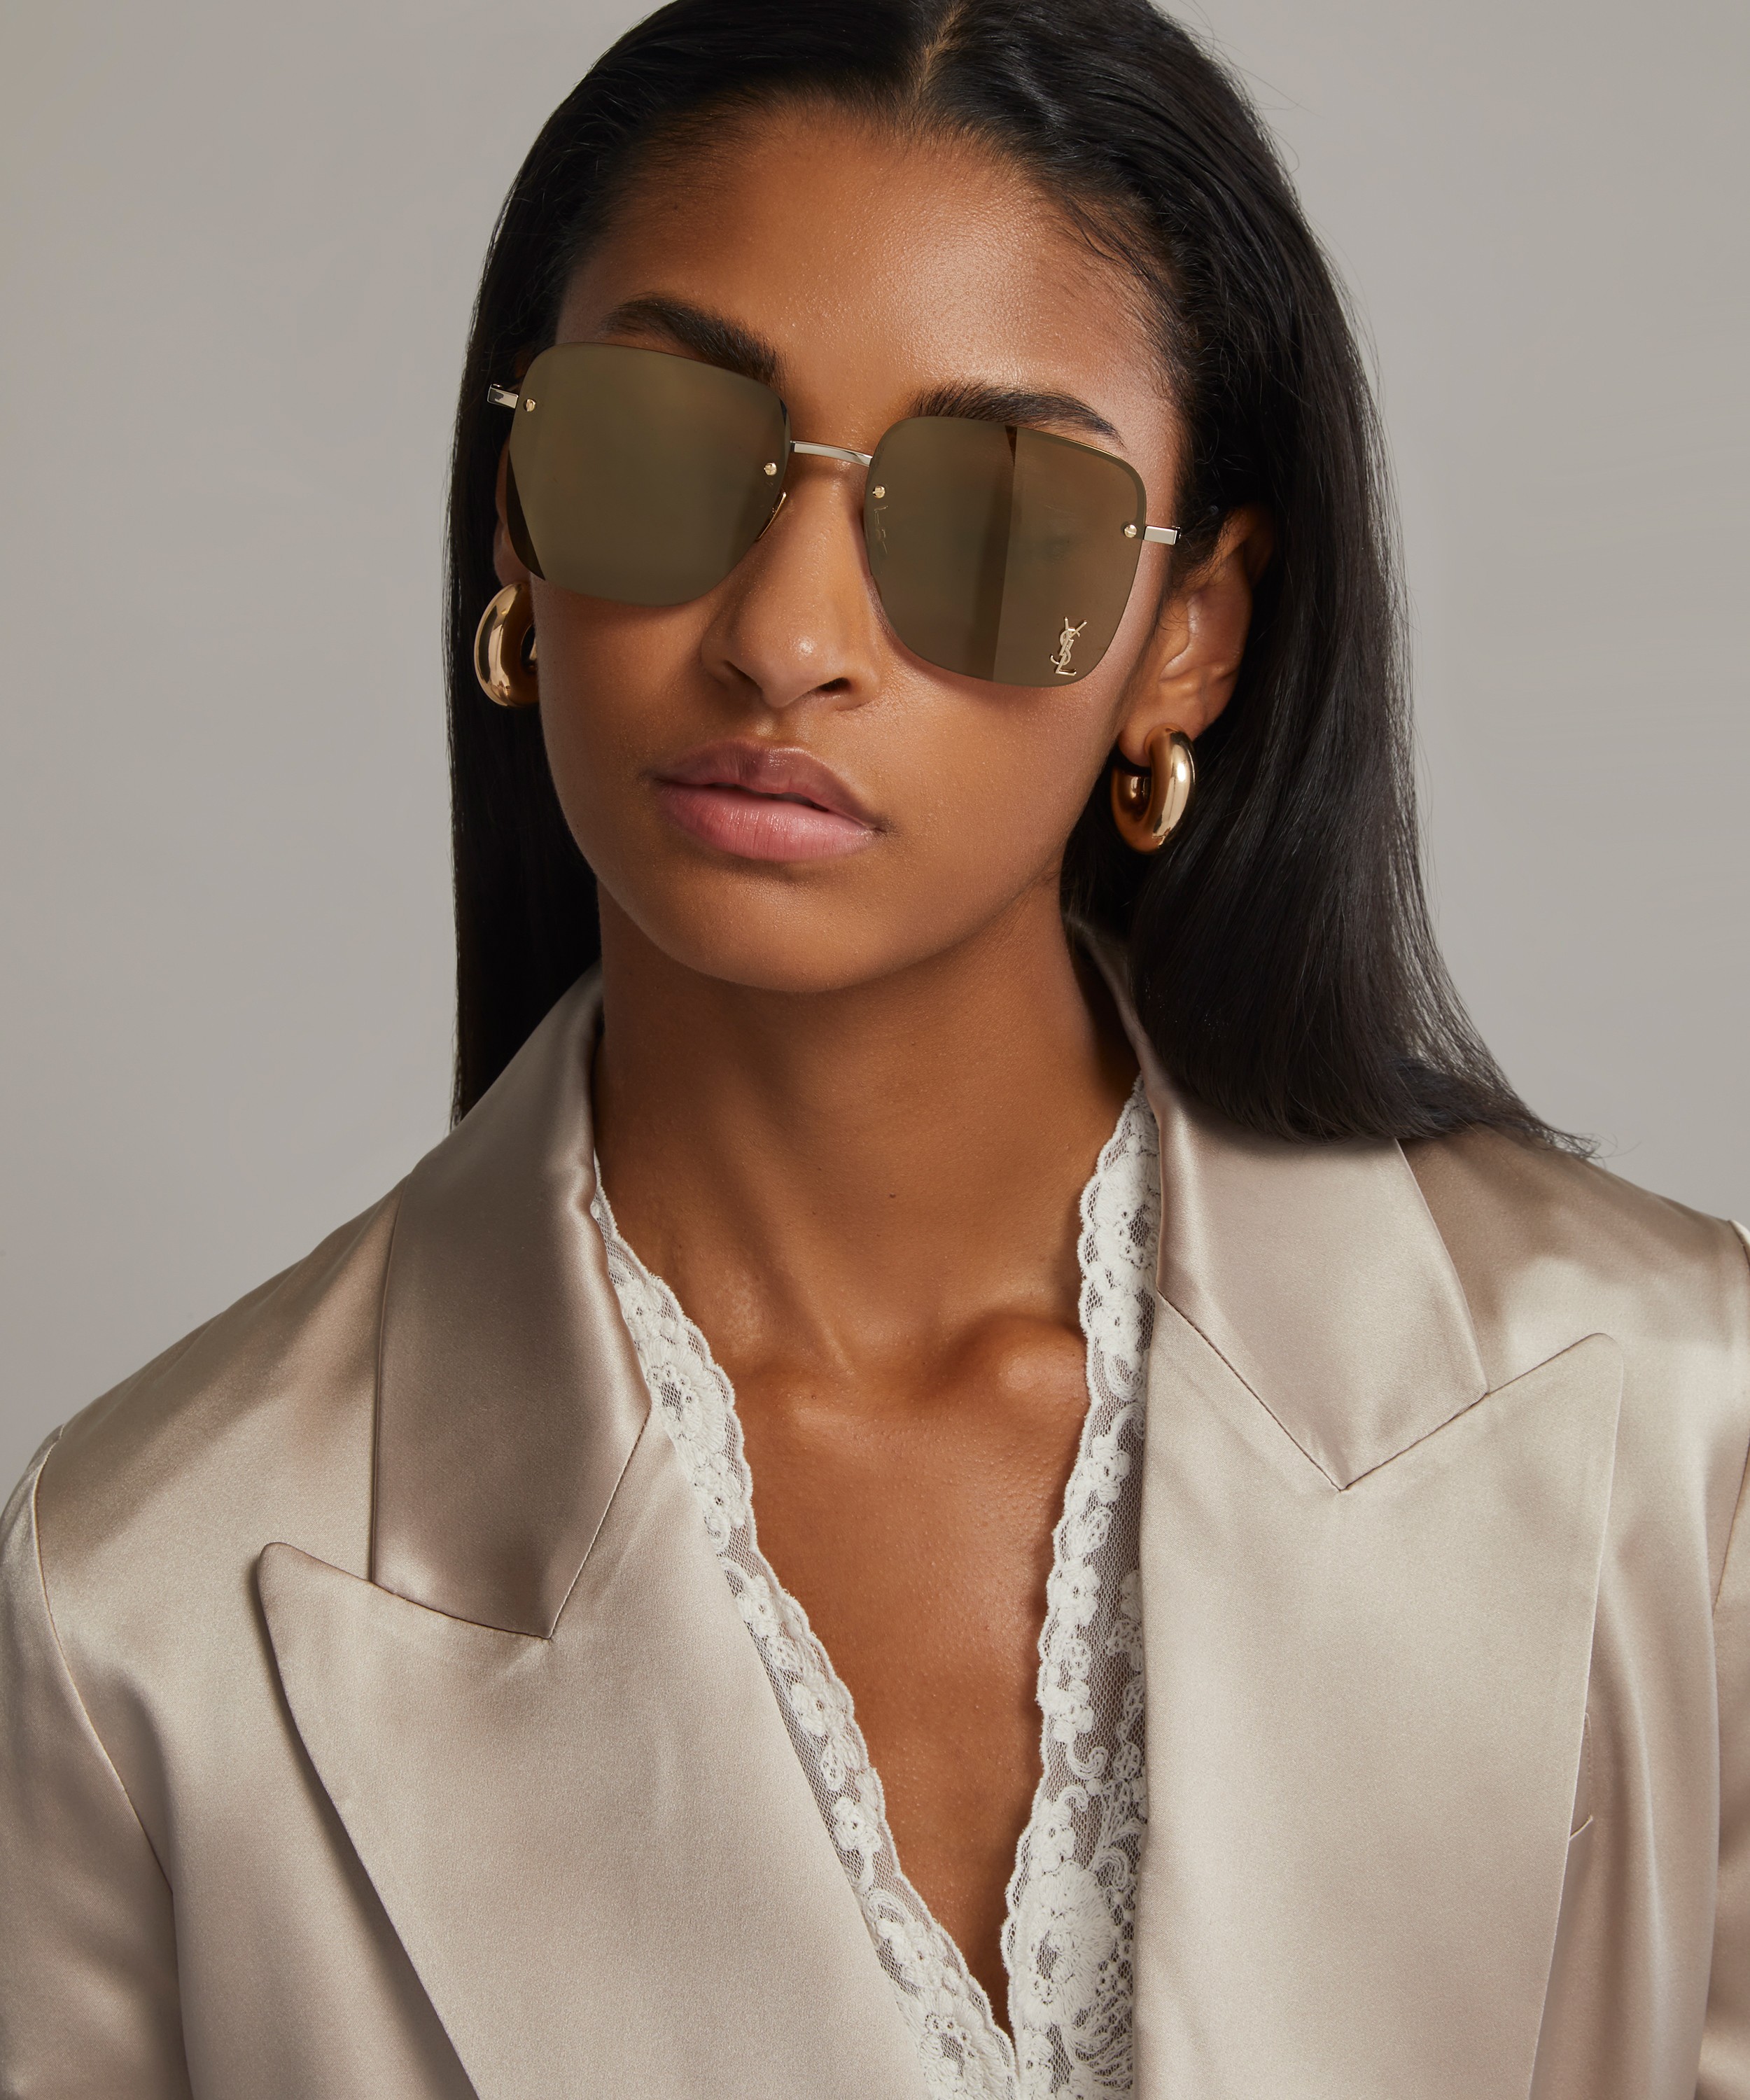  SAINT LAURENT Women's Square Metal Sunglasses, Gold Gold Brown,  One Size : Clothing, Shoes & Jewelry